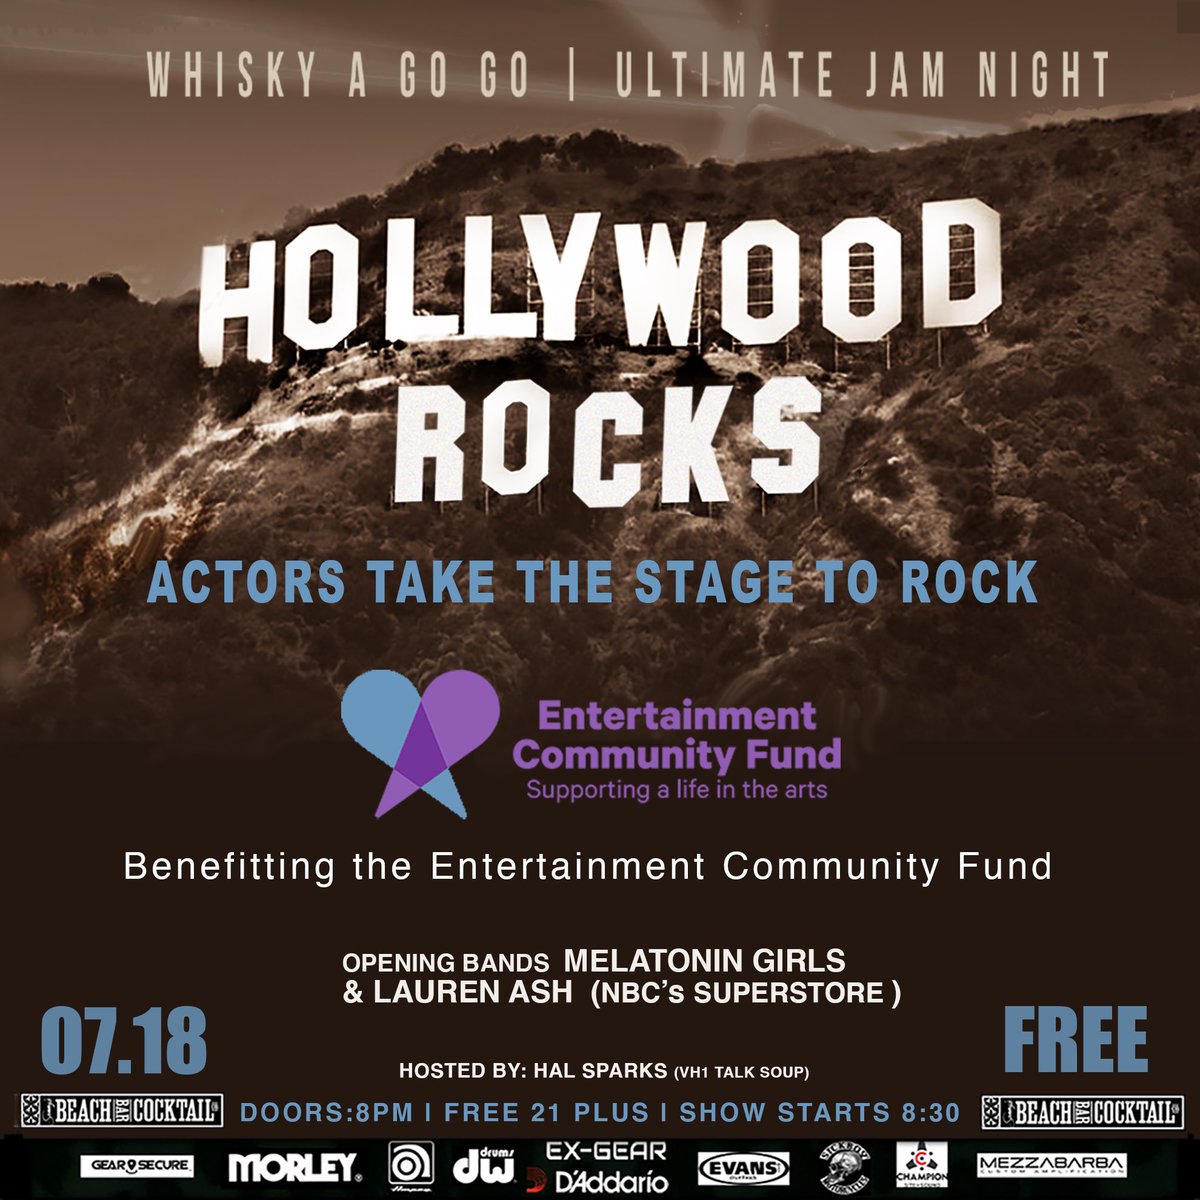 SAVE THE DATE! JULY 18TH! You know them from TV & Film. Now see them rock. Actors join Rockers on July 18th to benefit the Entertainment Community Fund. Whisky A Go-Go Tuesday July 18, 2023 Doors 8pm Openers at 8:30pm: Melatonin Girls and Lauren Ash of NBC TV's Superstore